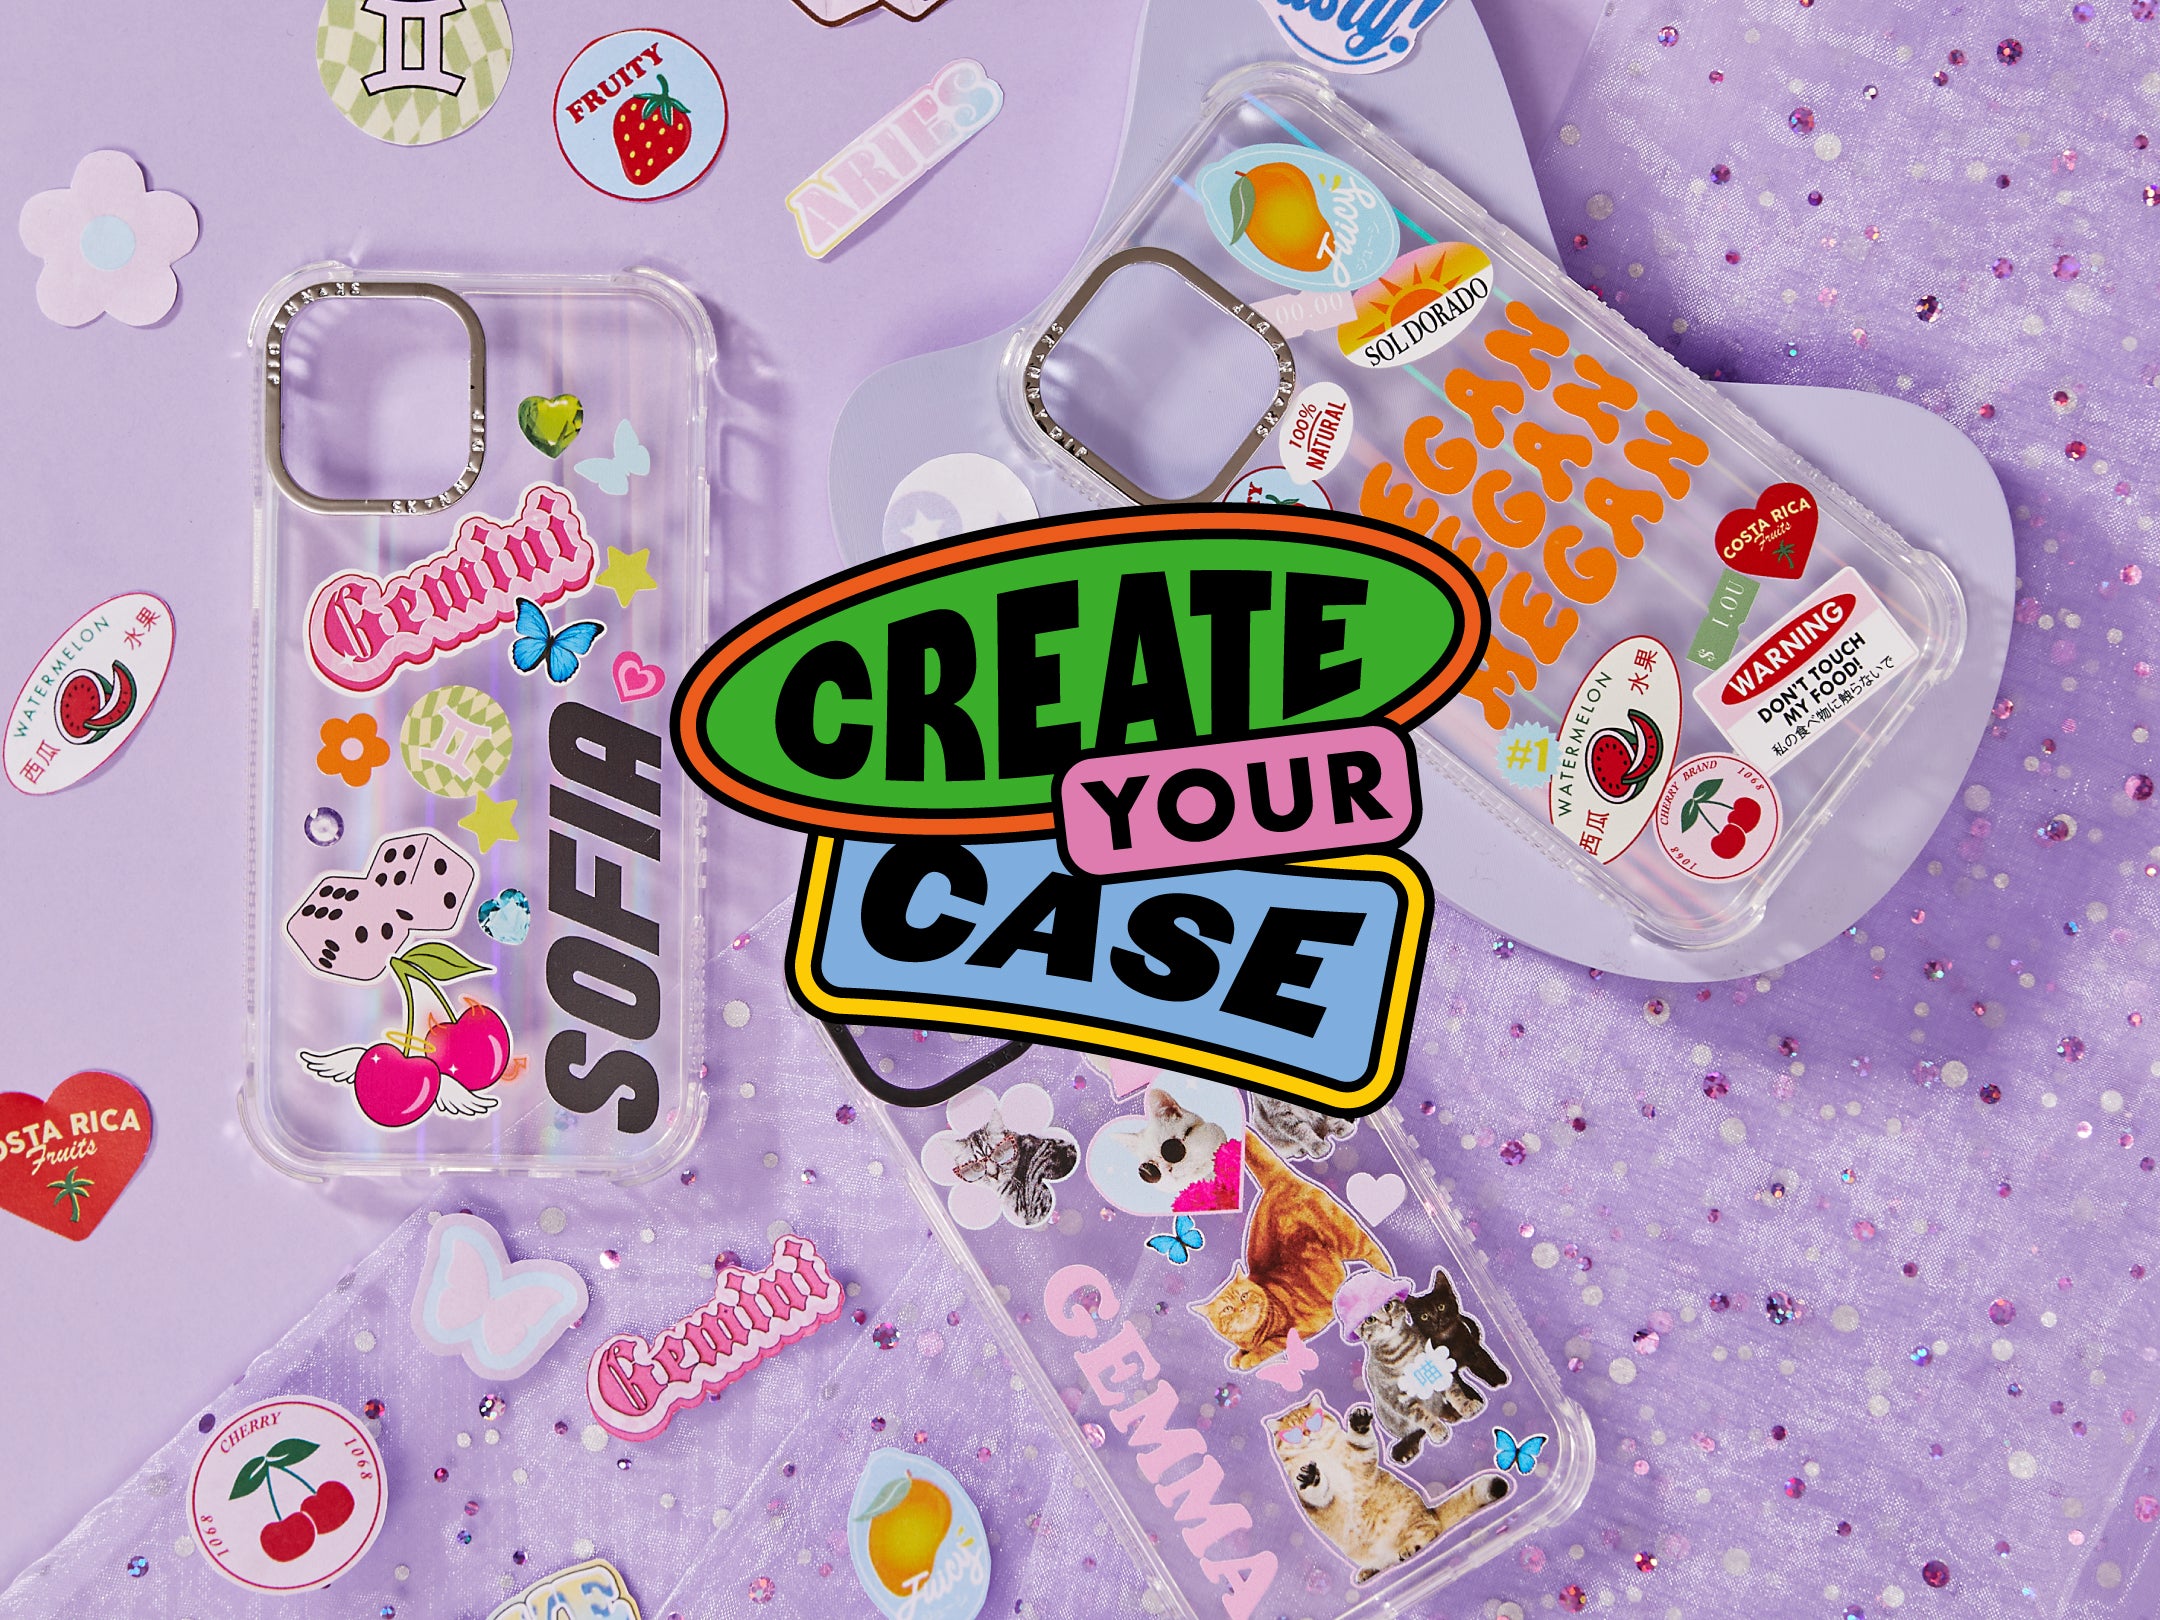 Create Your Case: Personalisation Has Landed